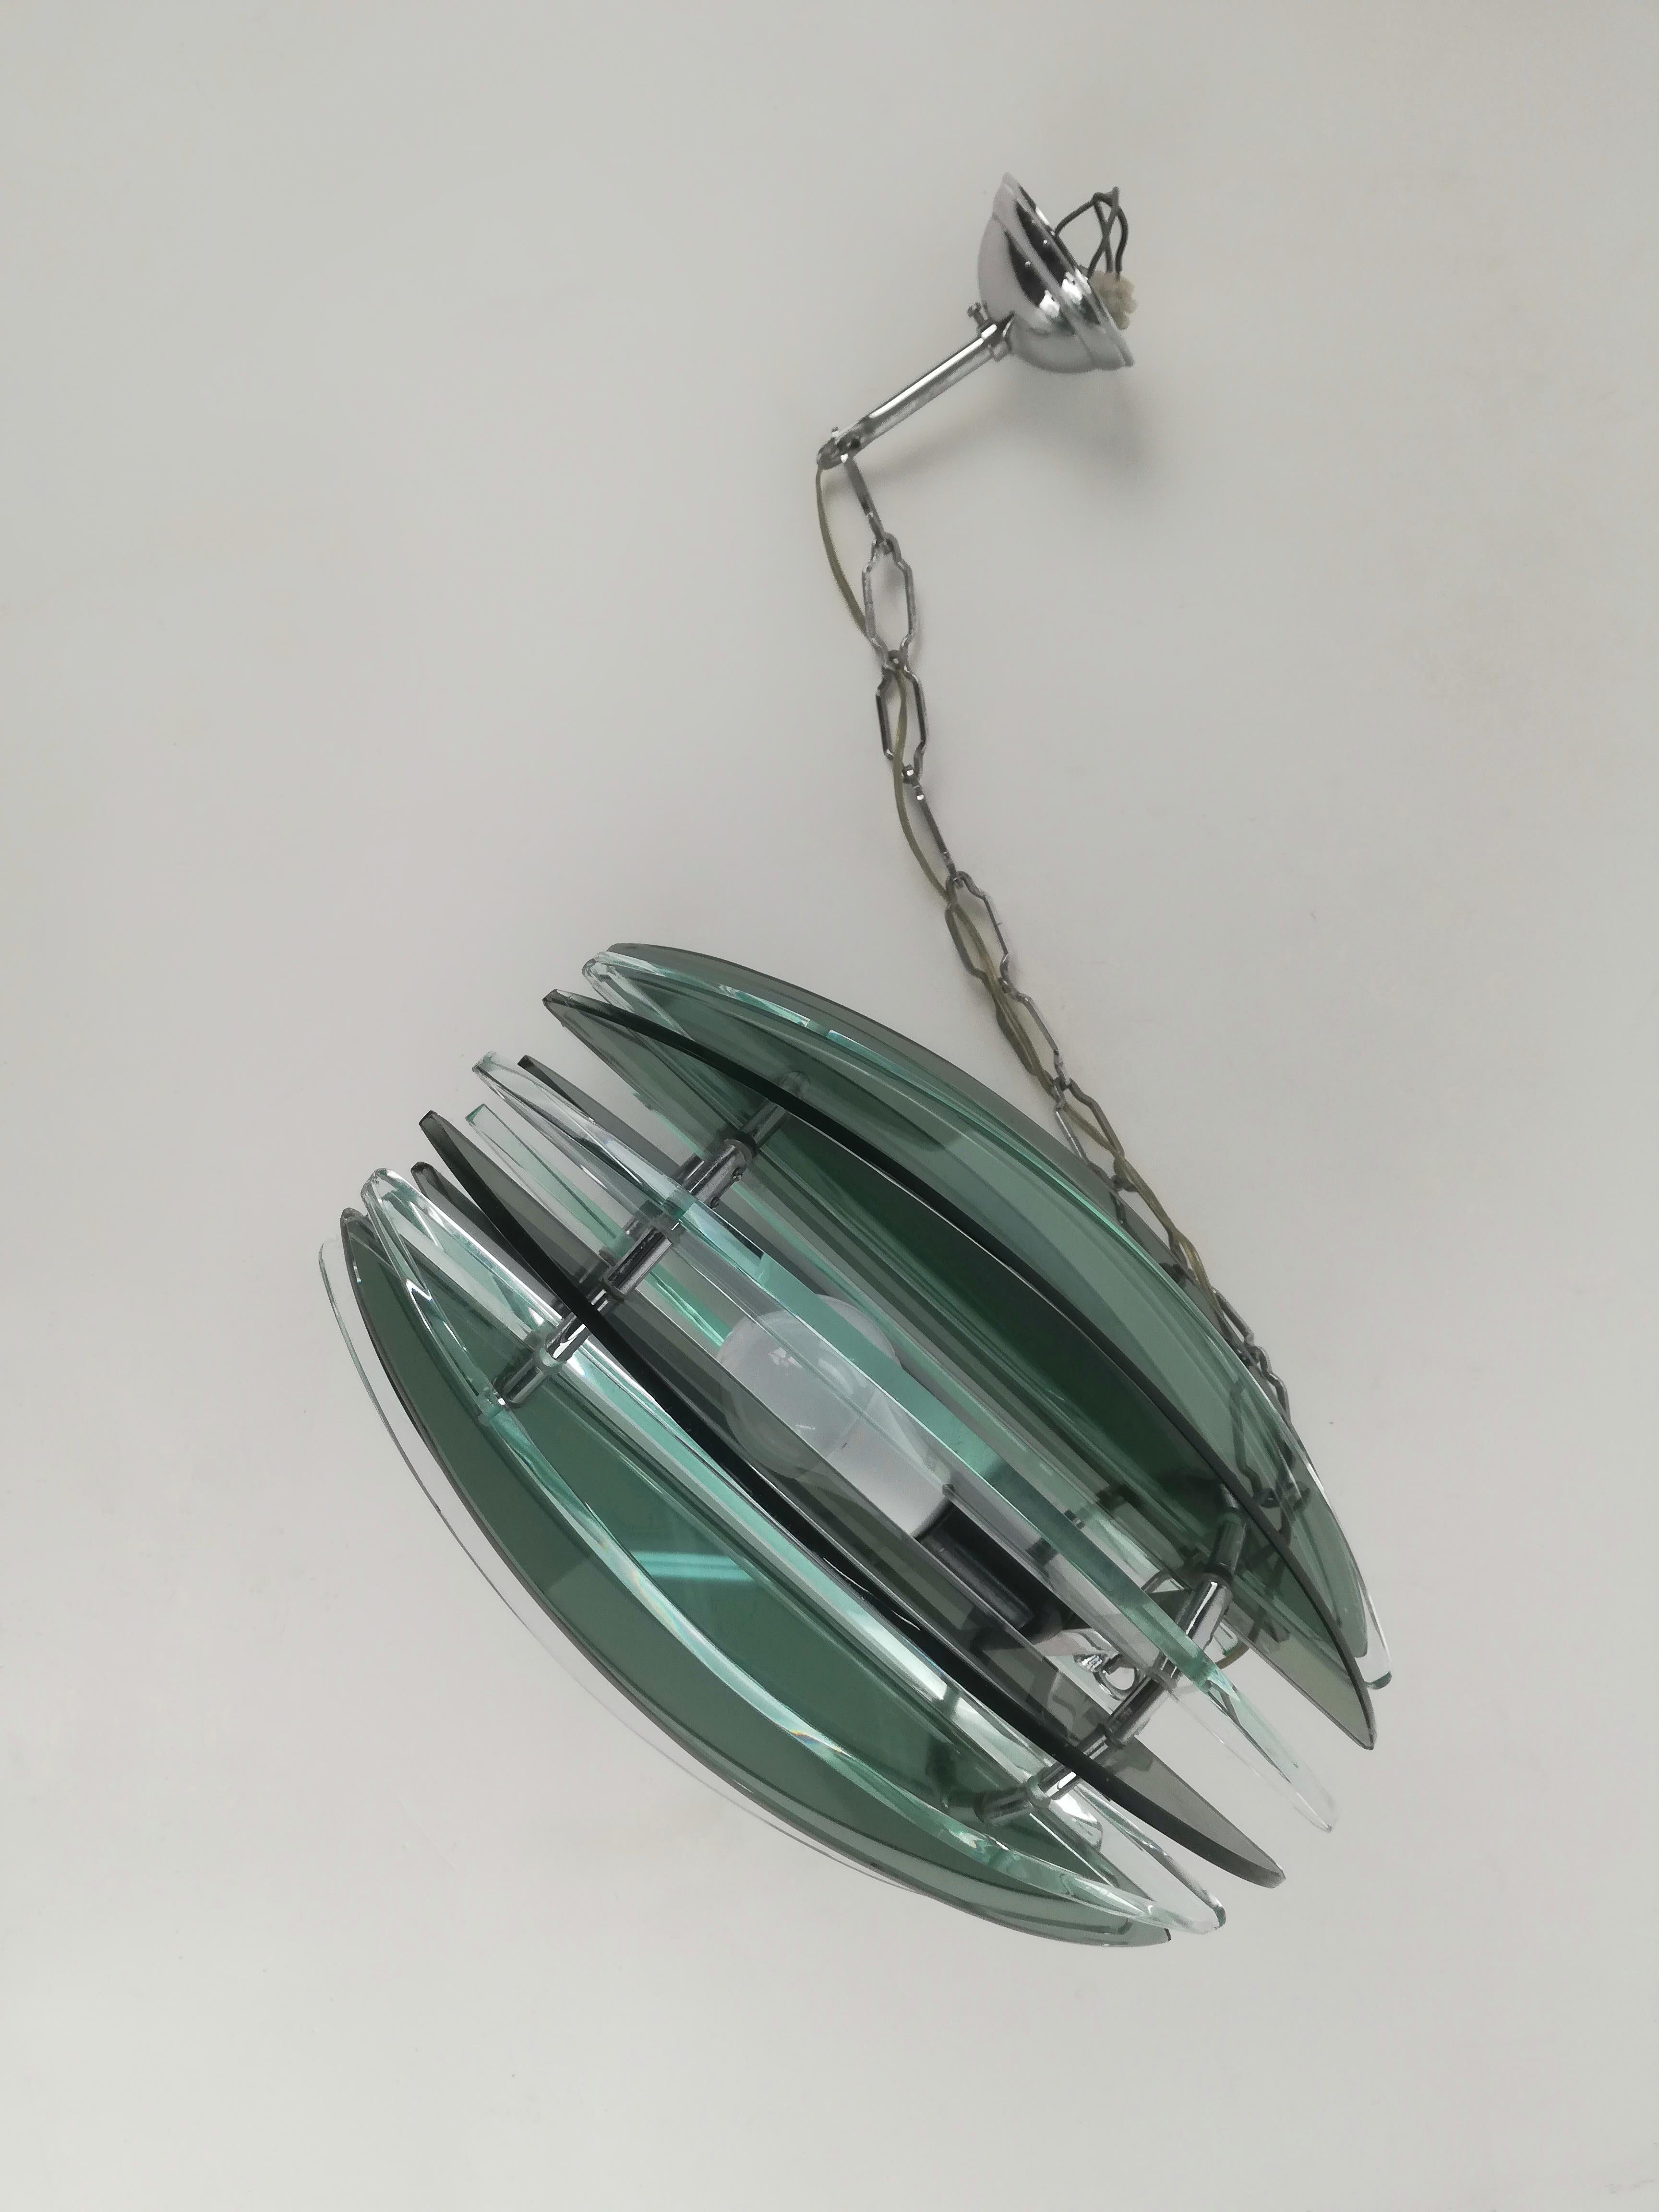 Italian Mid-Century Modern Chandelier by Veca in Fumè and Turquoise Glass For Sale 8